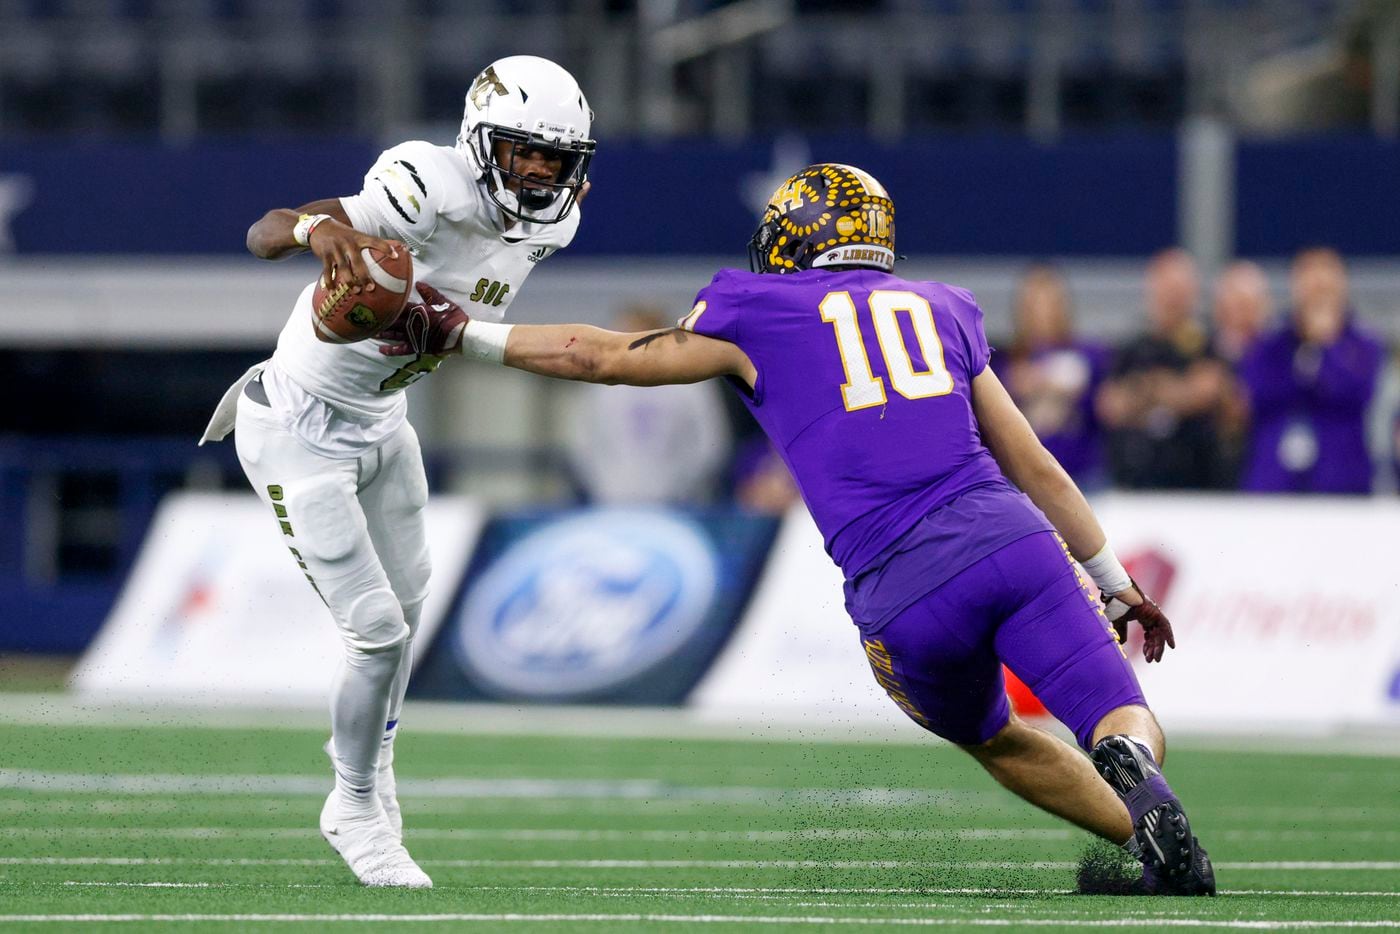 South Oak Cliff quarterback Kevin Henry-Jennings (8) jumps around Liberty Hill linebacker Andon Thomas (10) during the first quarter of their Class 5A Division II state championship game at AT&T Stadium in Arlington, Saturday, Dec. 18, 2021. (Elias Valverde II/The Dallas Morning News)